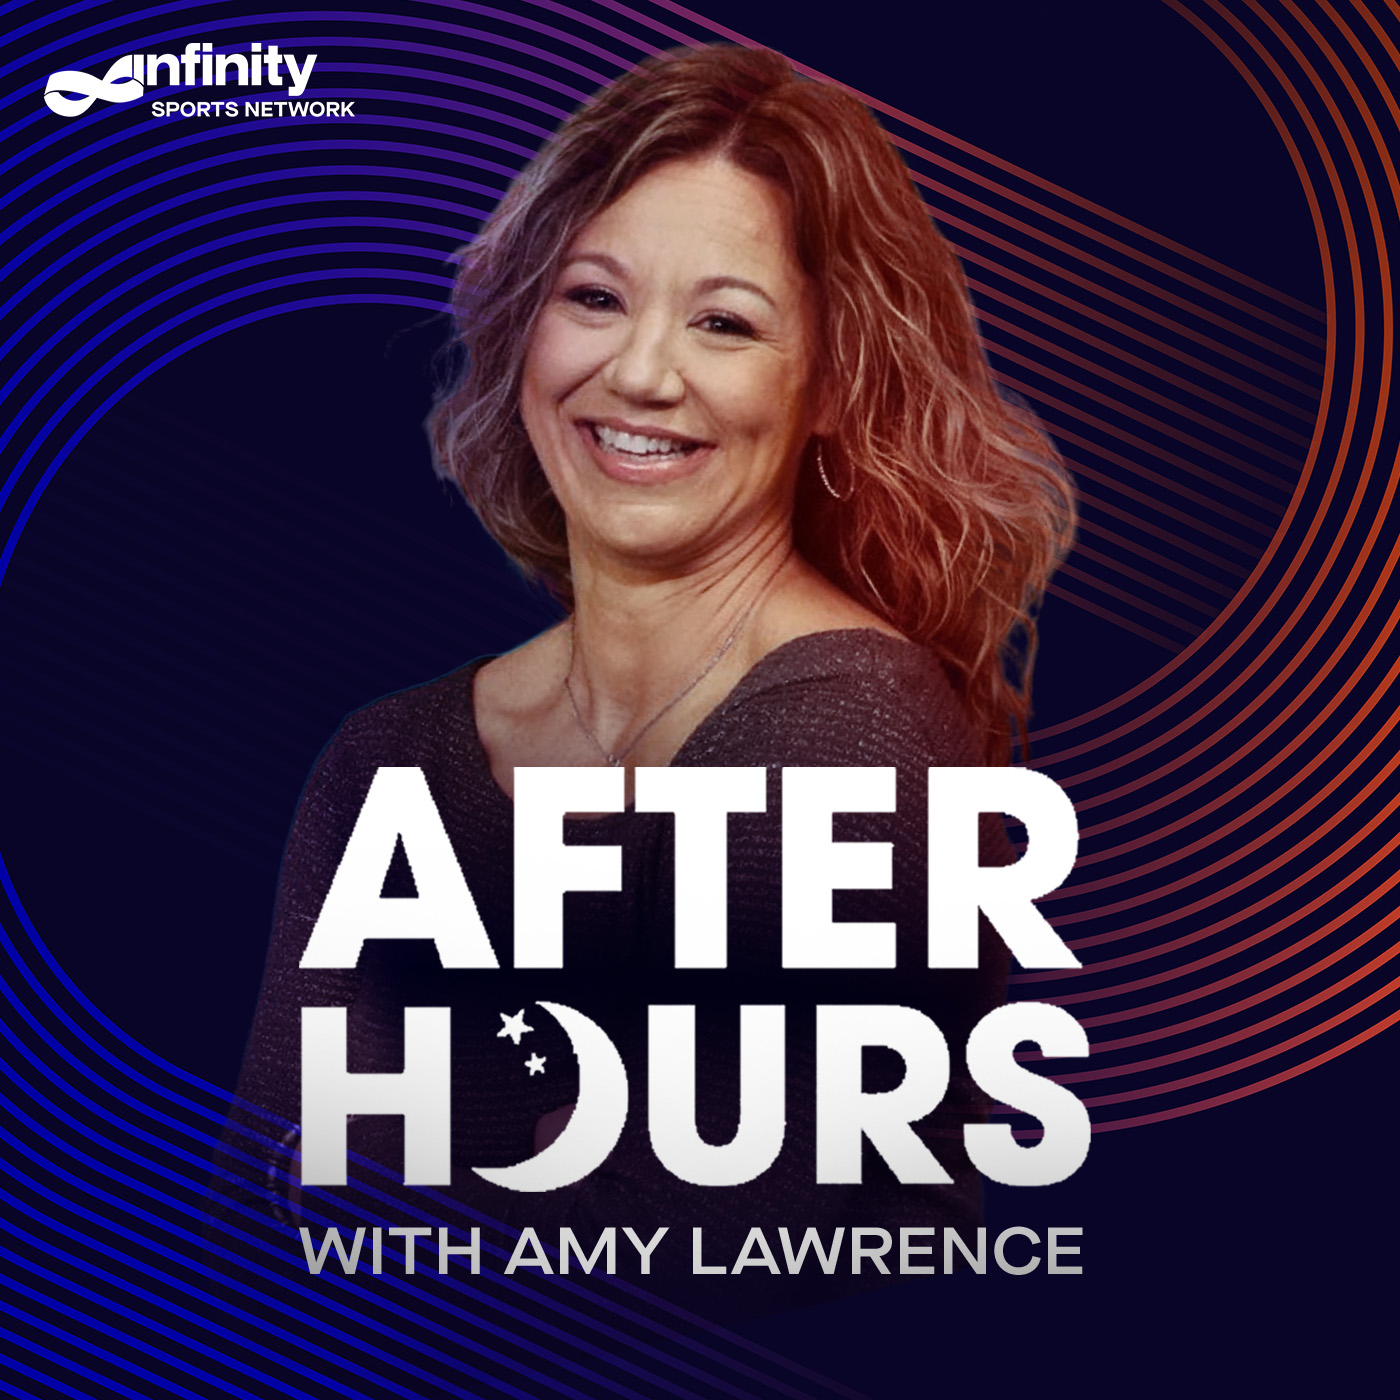 5/12/21 After Hours with Amy Lawrence PODCAST: Hour 2